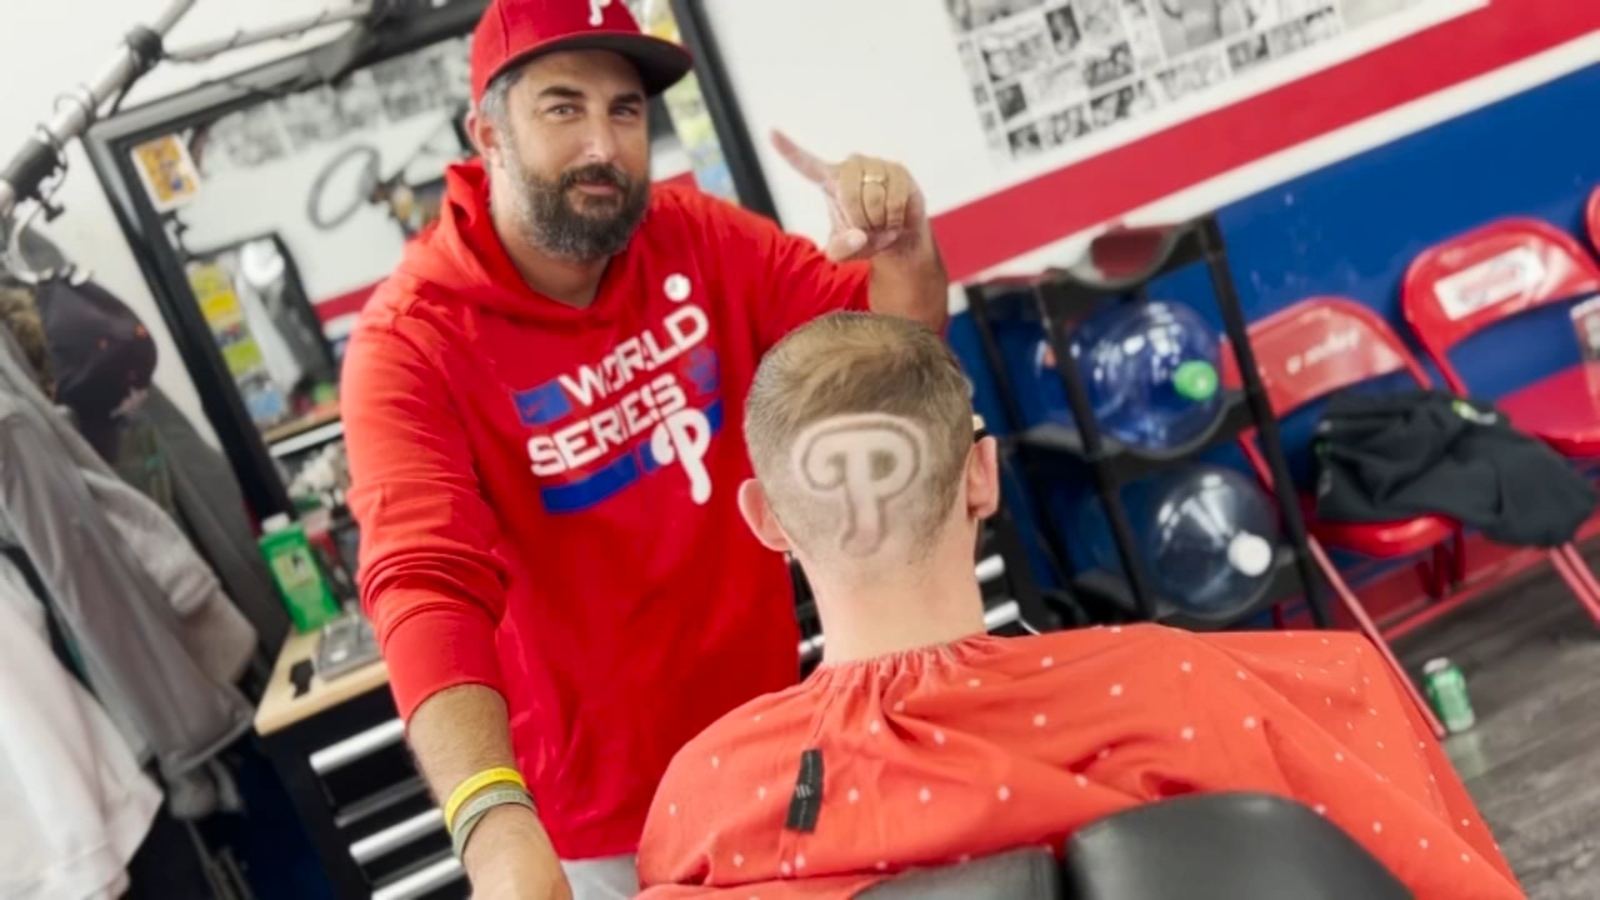   
																Plymouth Meeting barber offering special Phillies haircuts 
															 